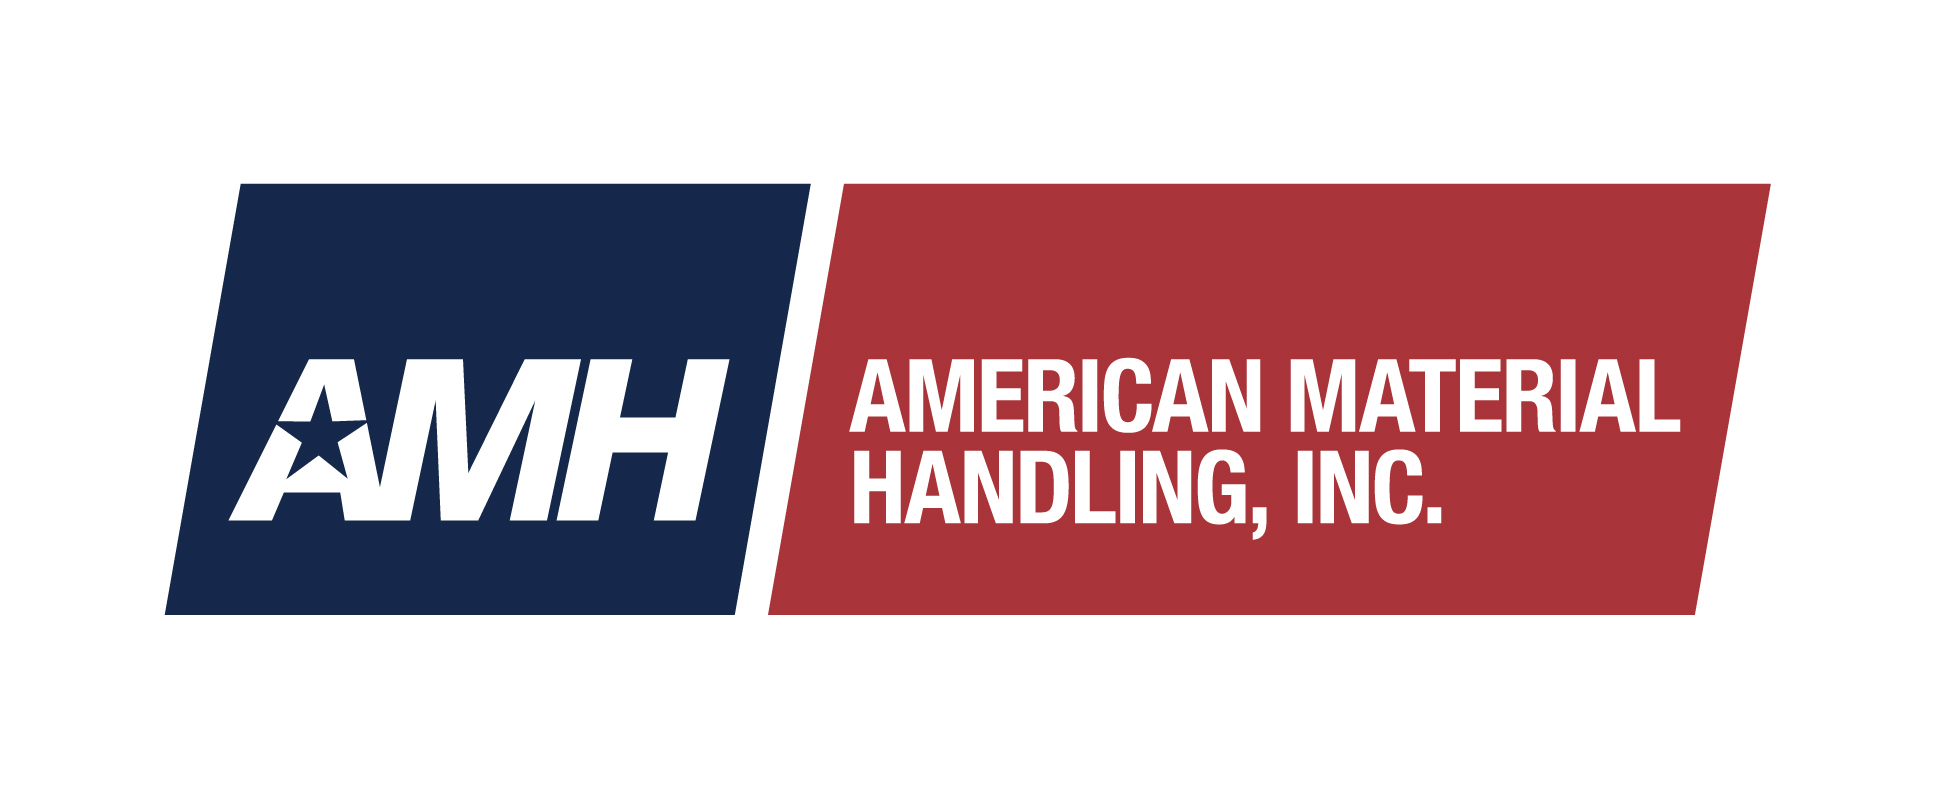 American Material Handling, Inc full company logo in blue white and read.